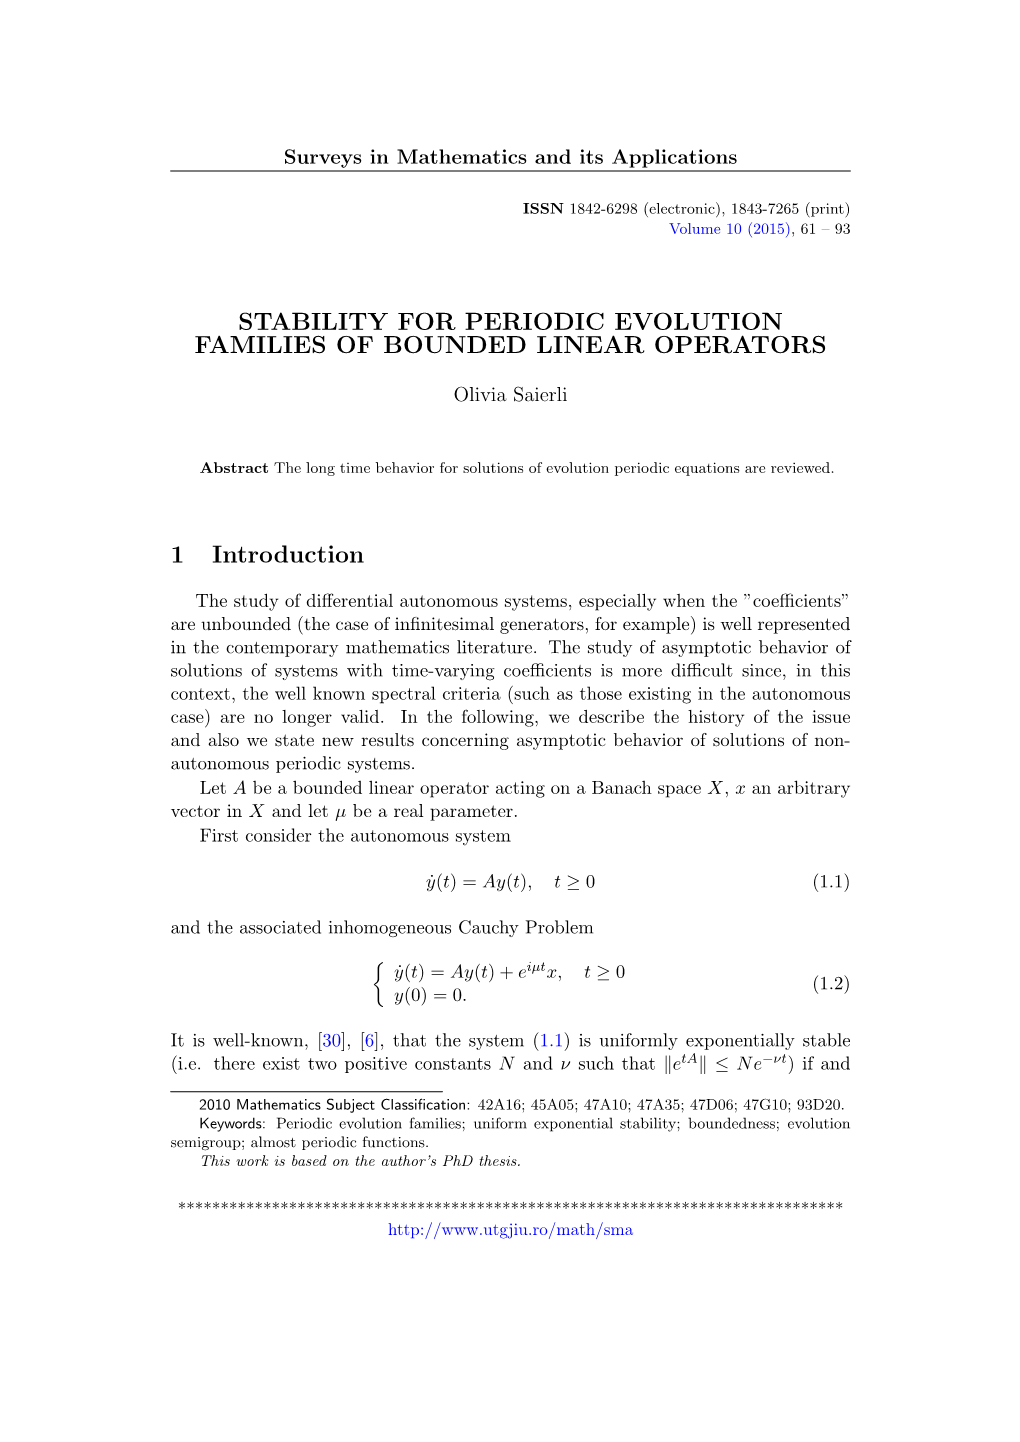 Stability for Periodic Evolution Families of Bounded Linear Operators